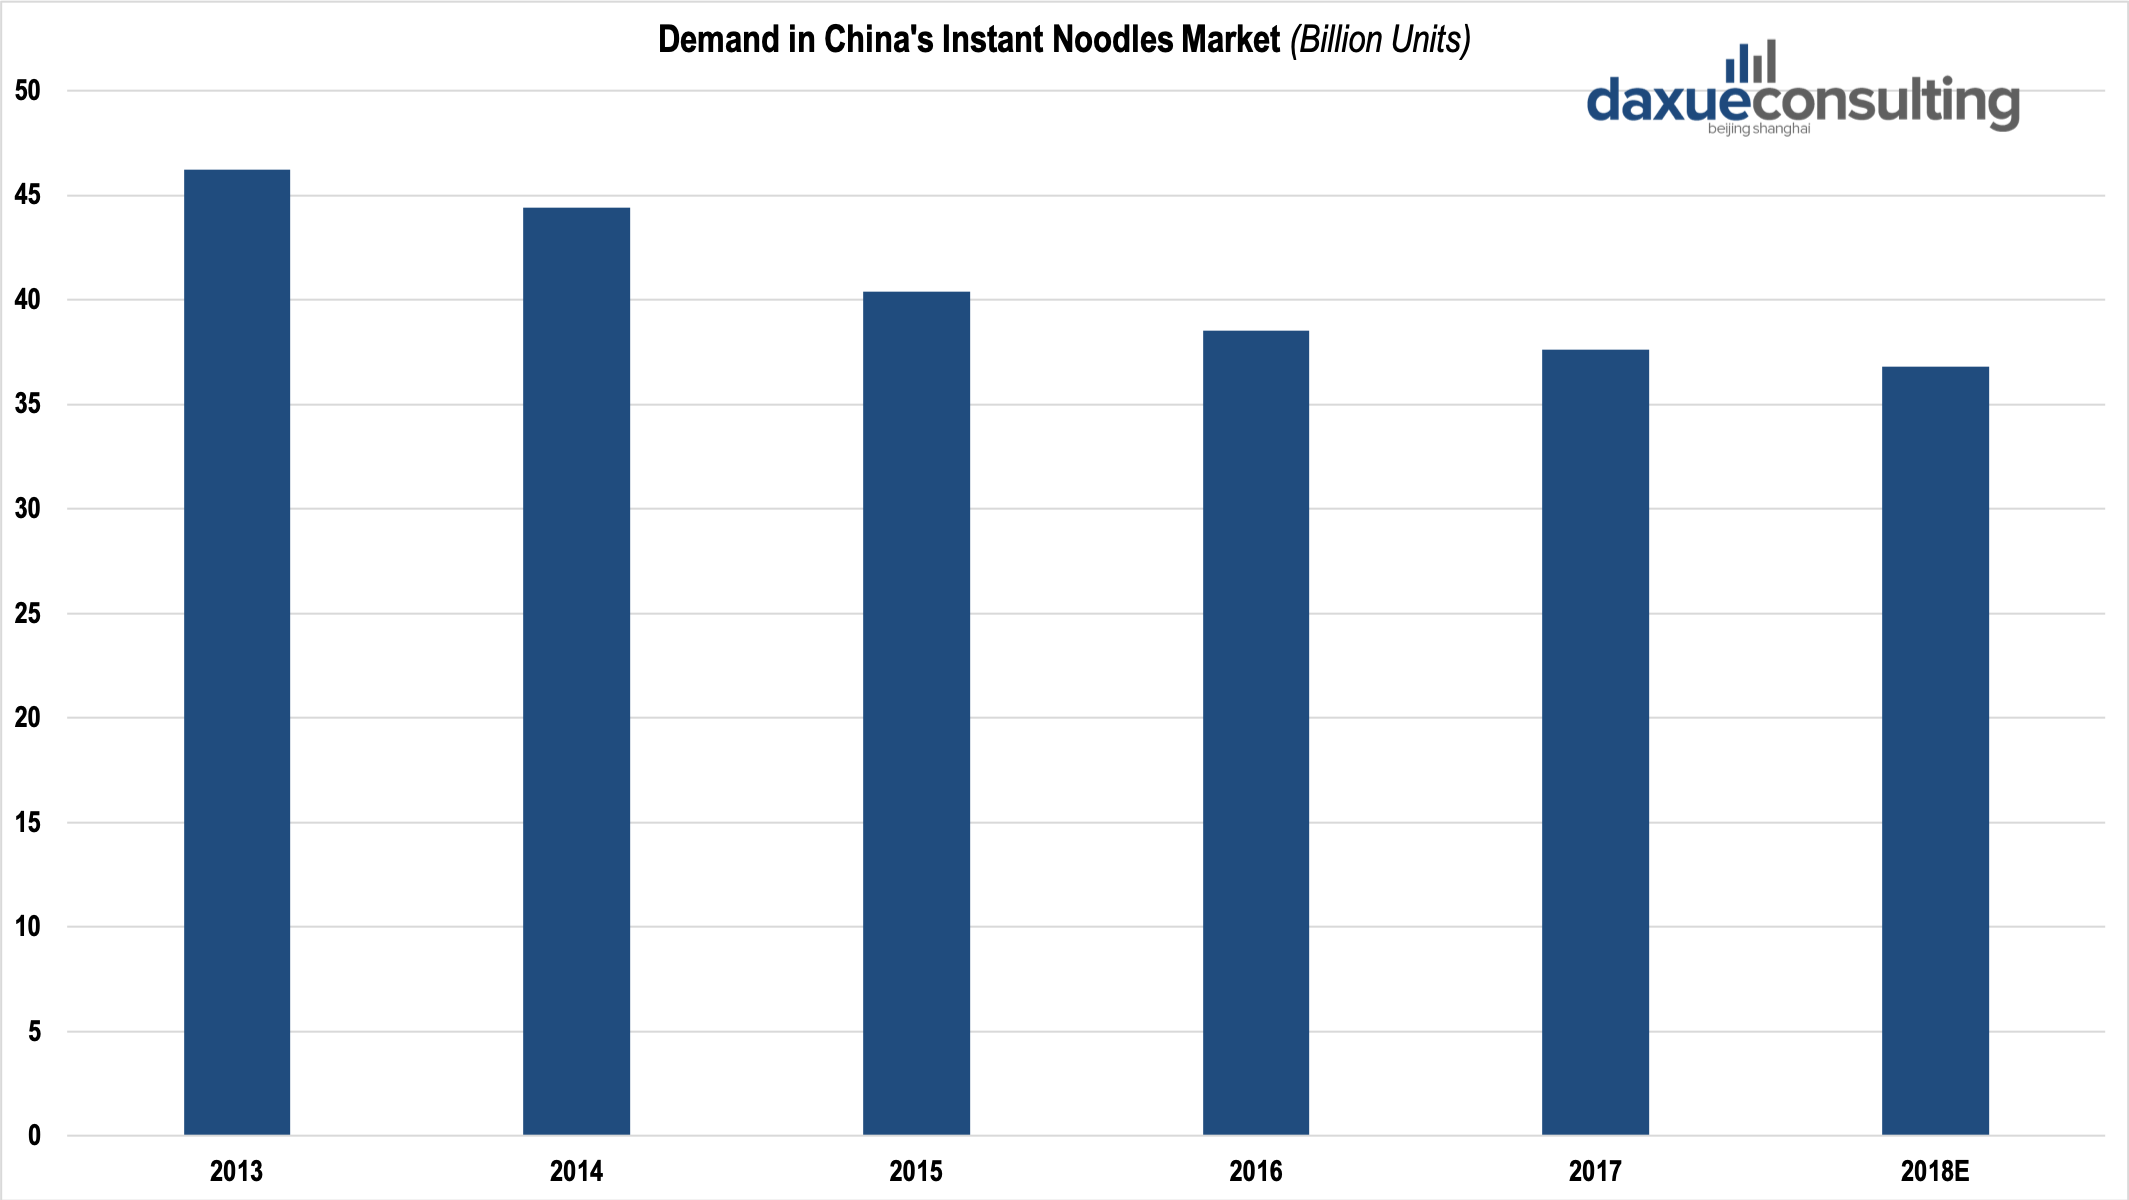 Demand in China's Instant Noodles Market